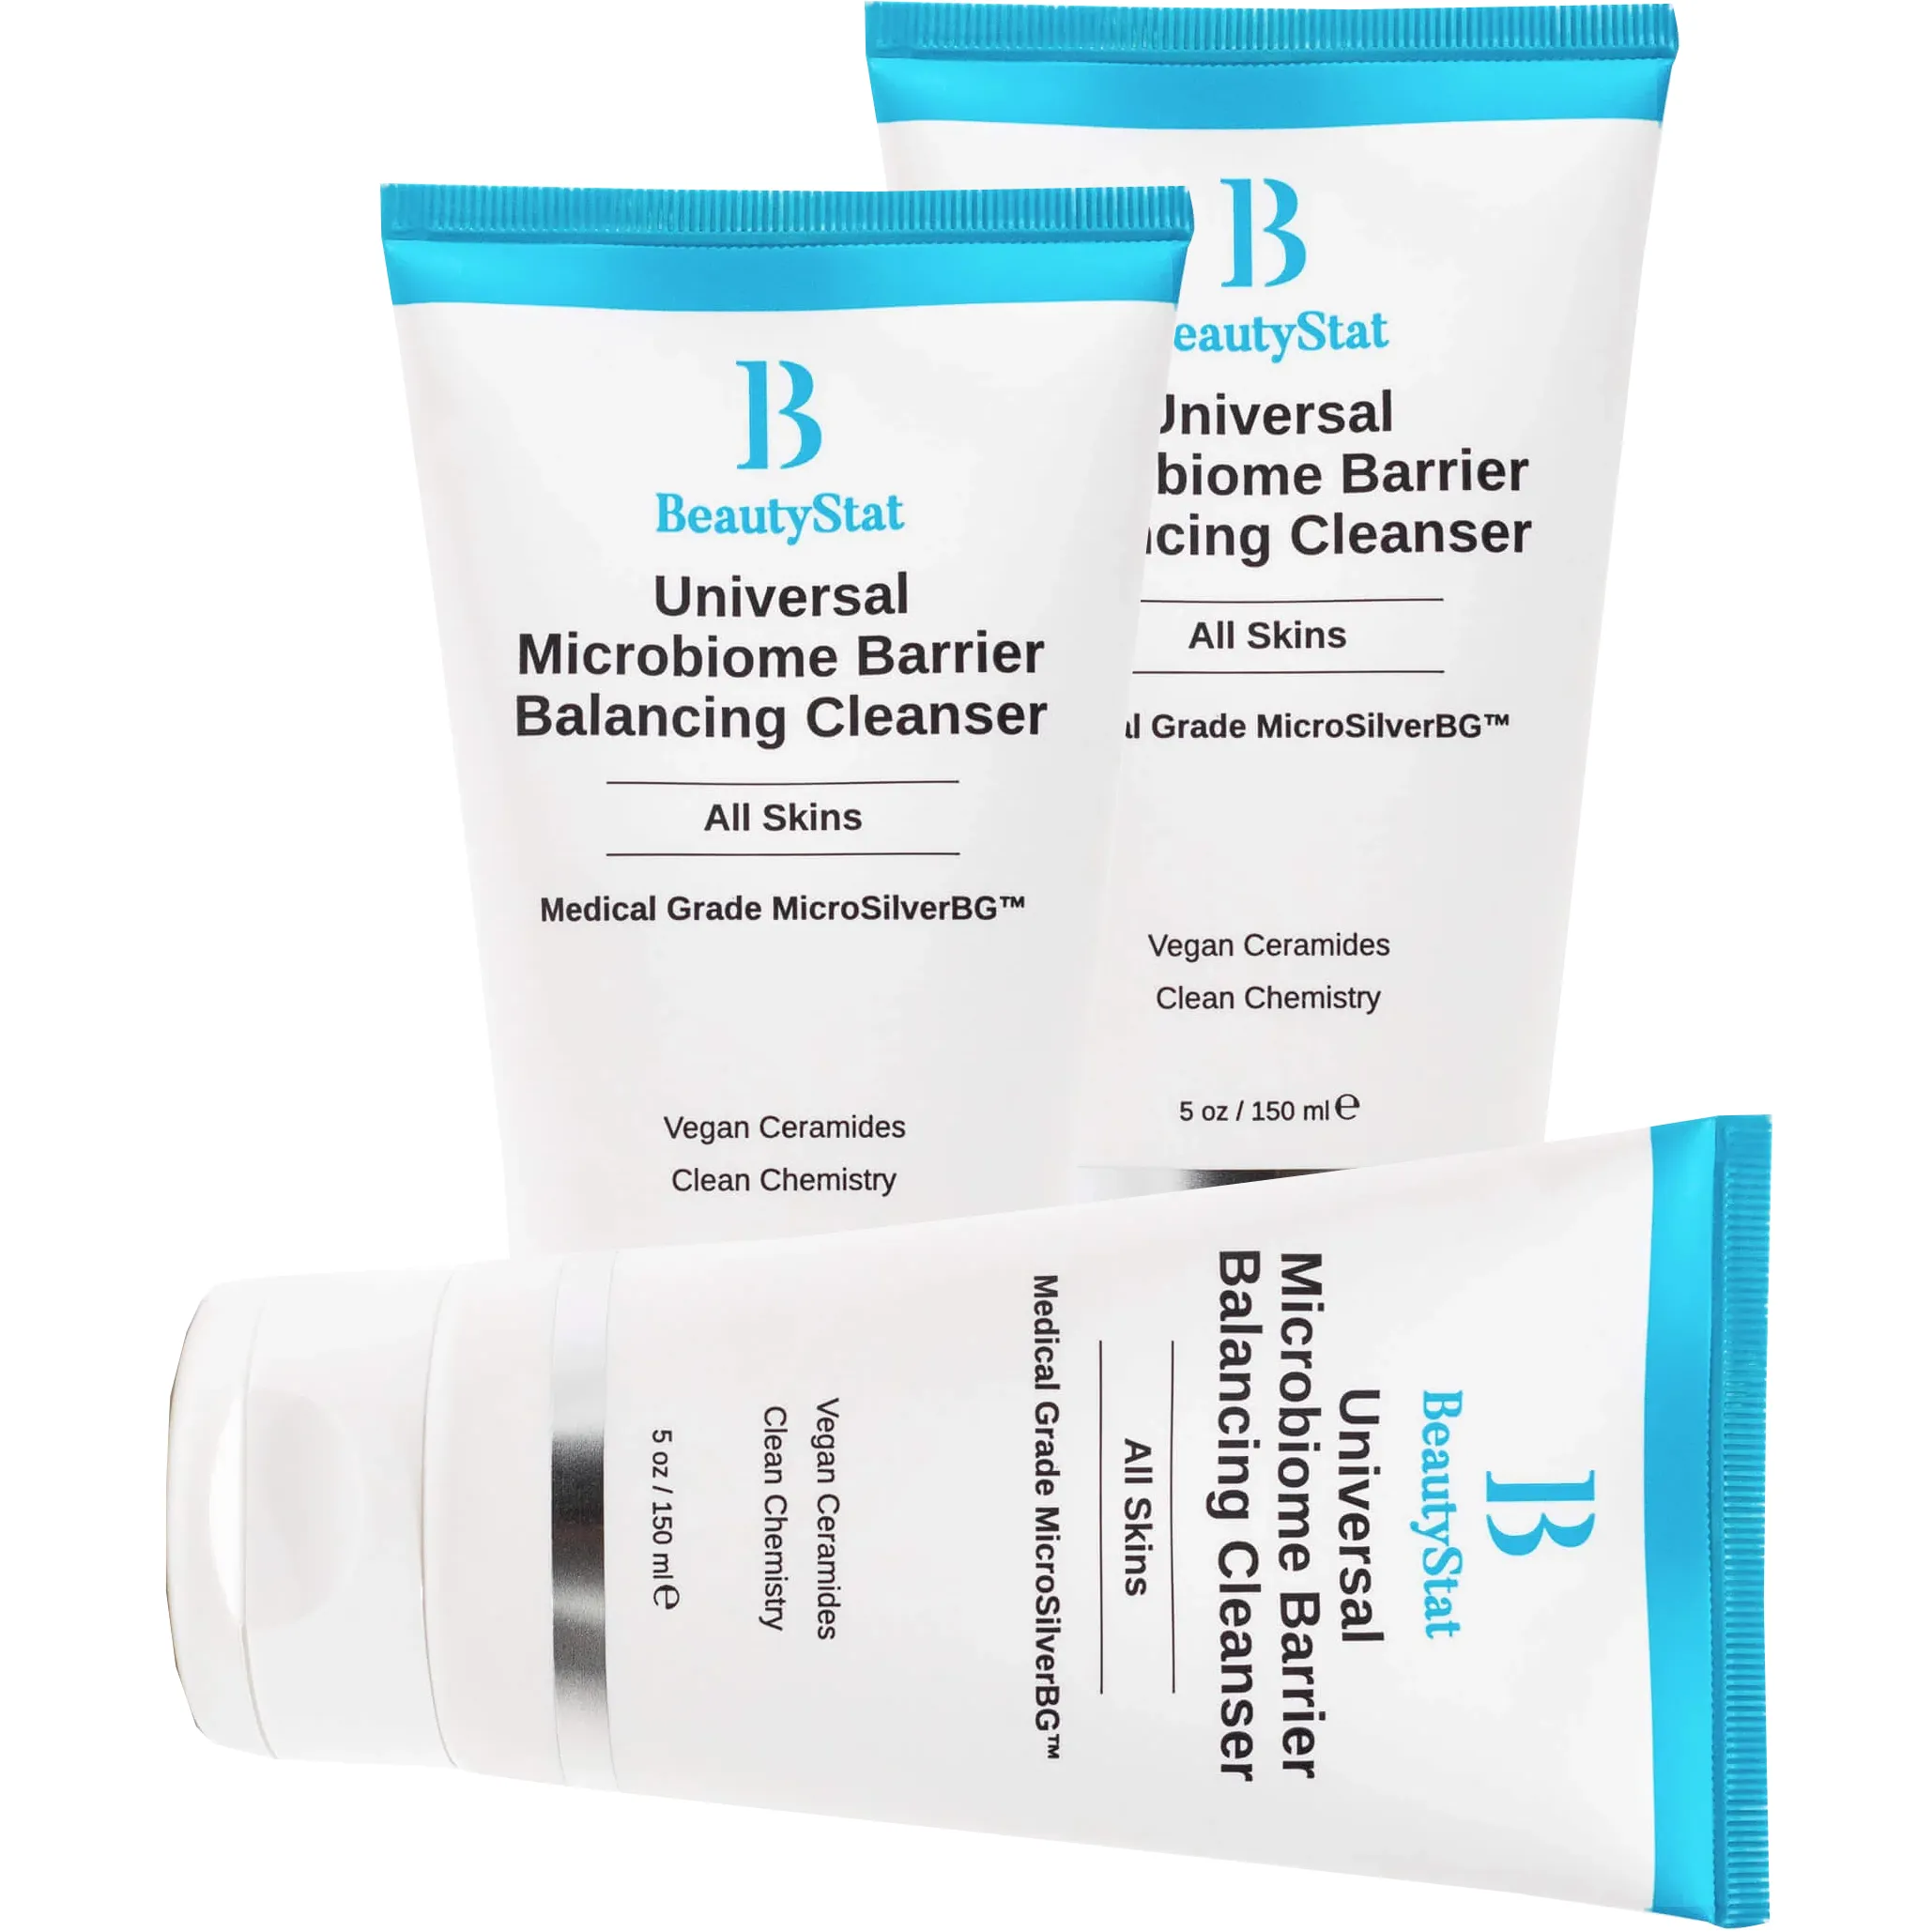 Free Universal Microbiome Barrier Balancing Cleanser